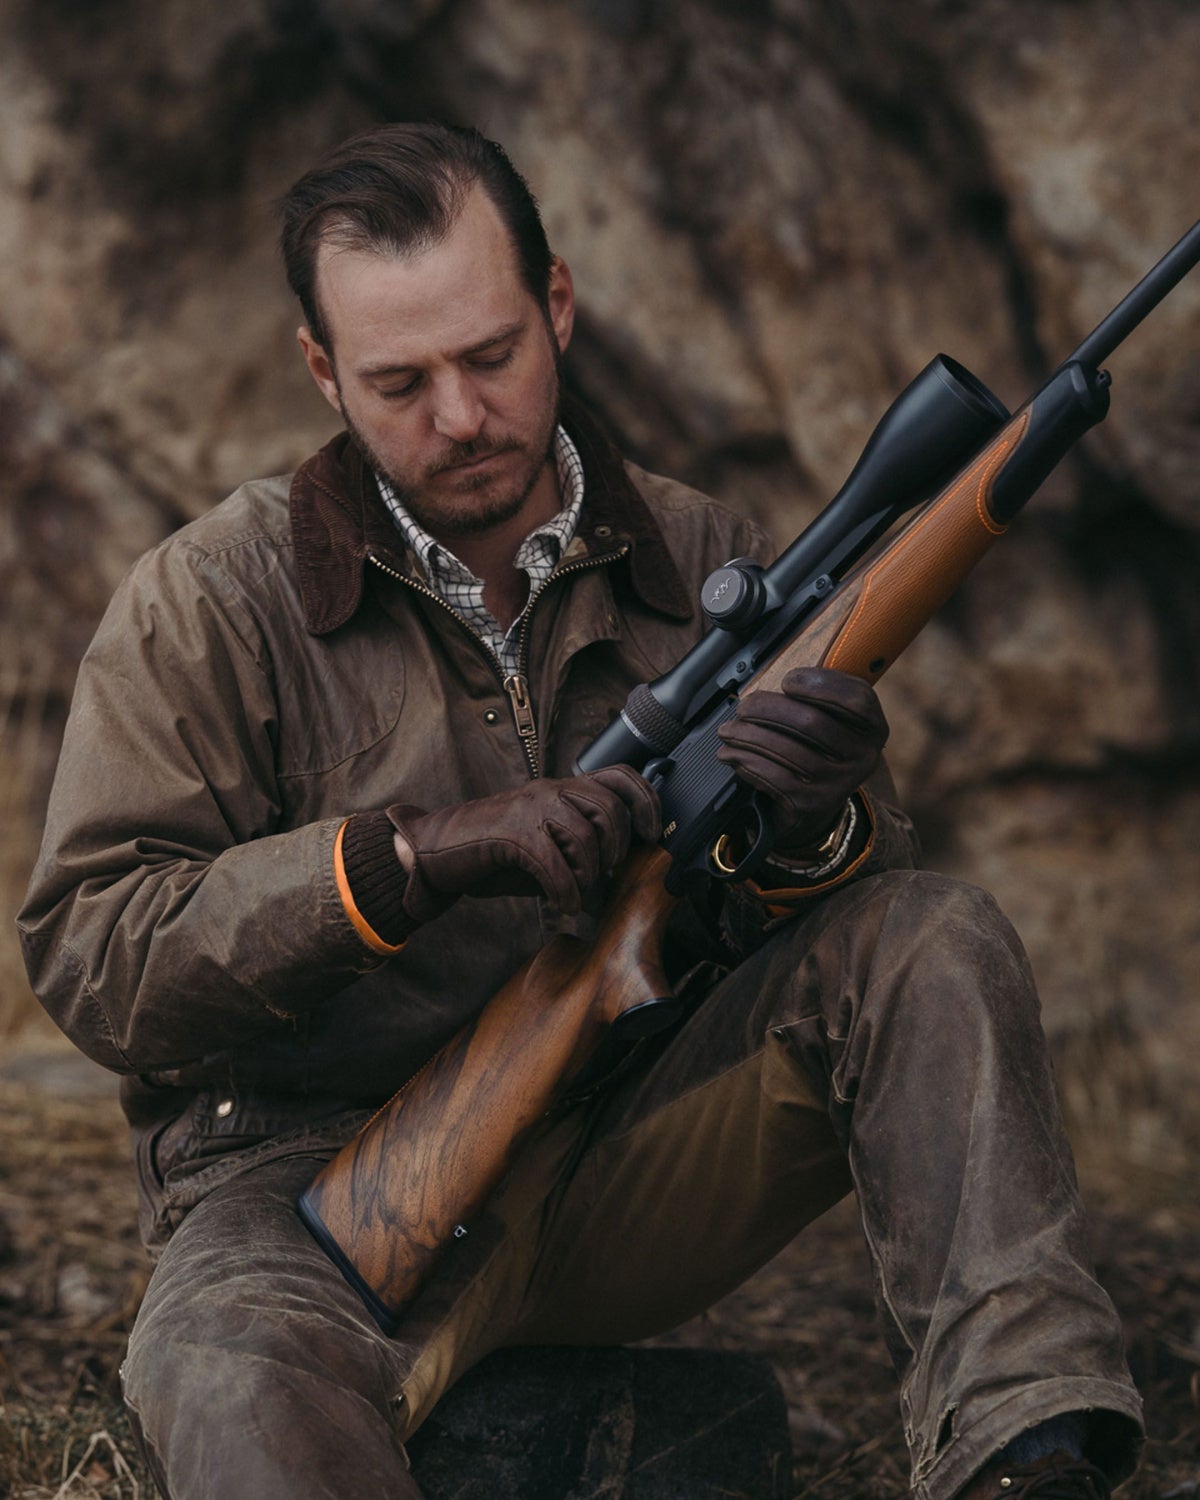 Ball & Buck and Blaser Team Up to Create the New Signature R8 Rifle